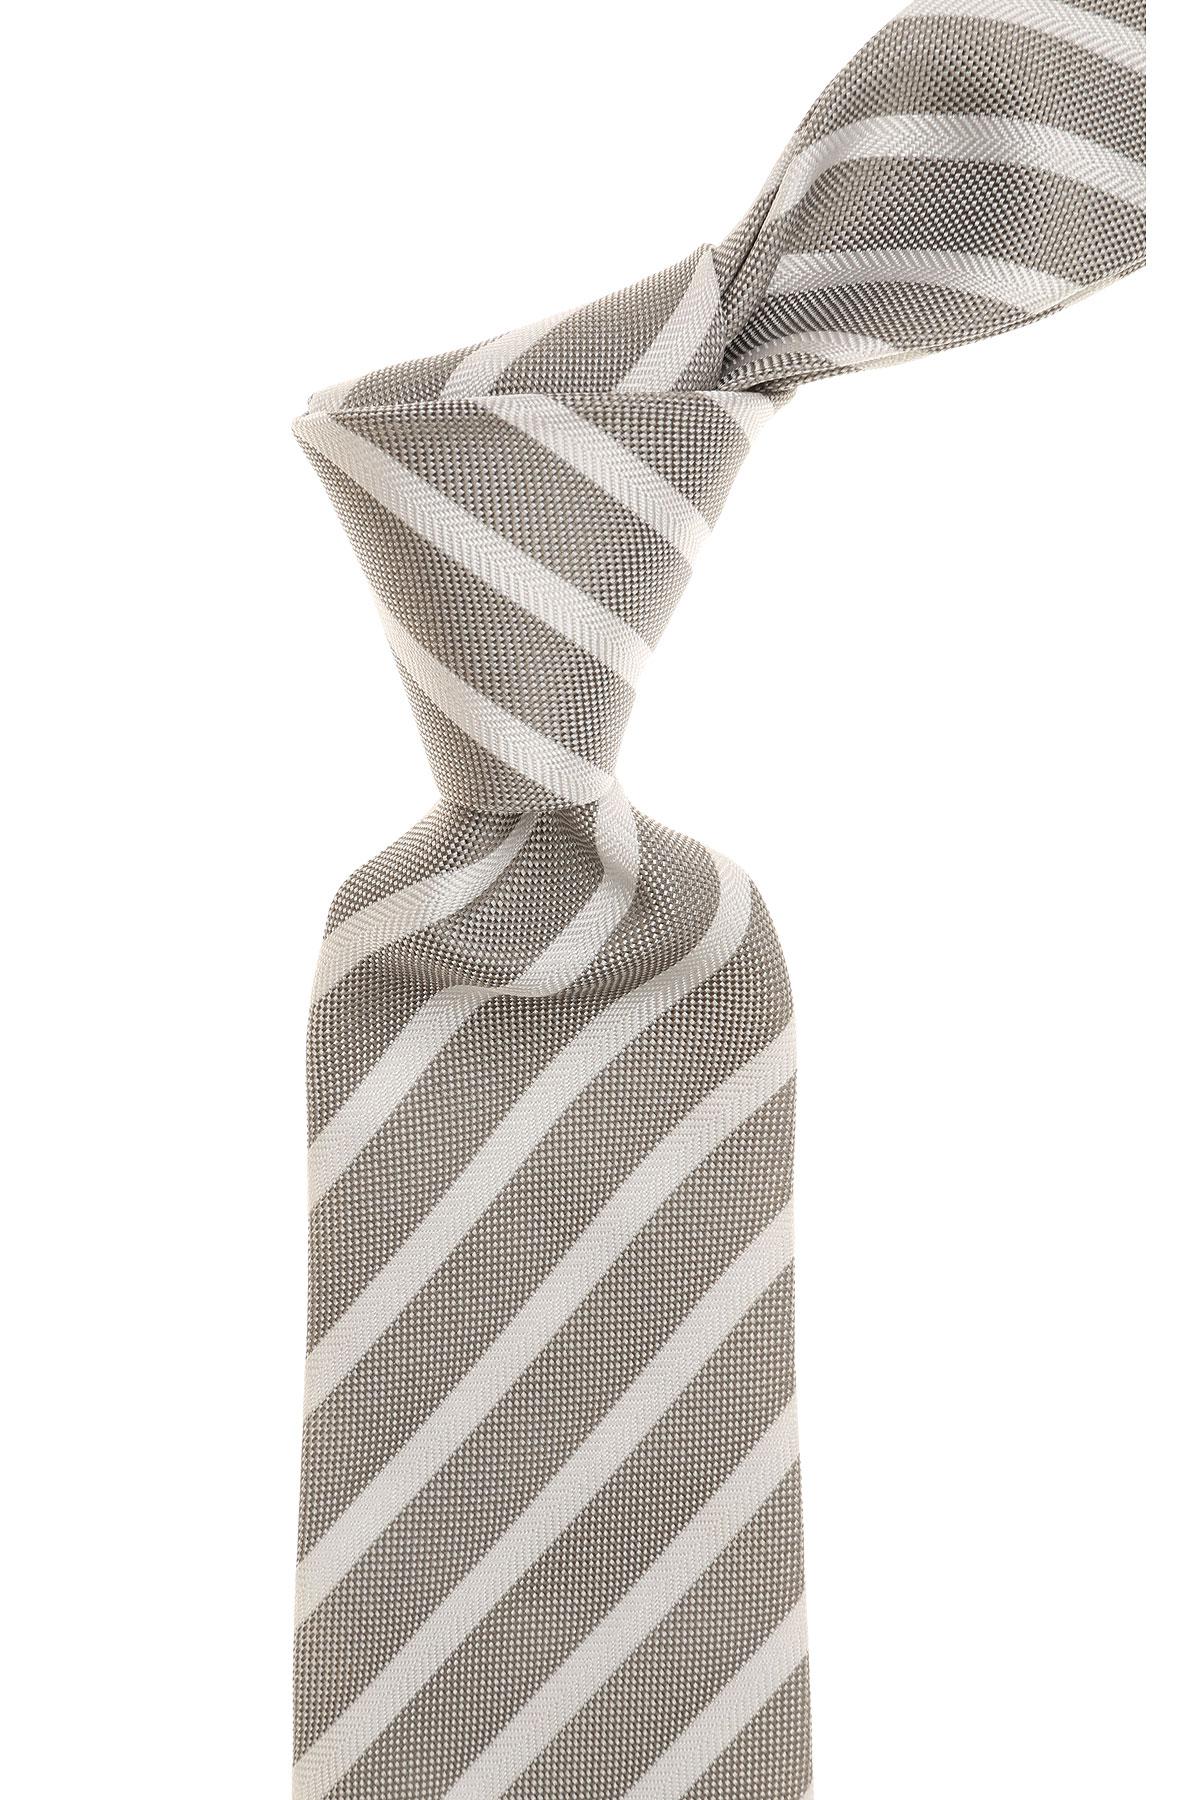 Gucci Silk Ties On Sale in Gray for Men - Save 18% - Lyst